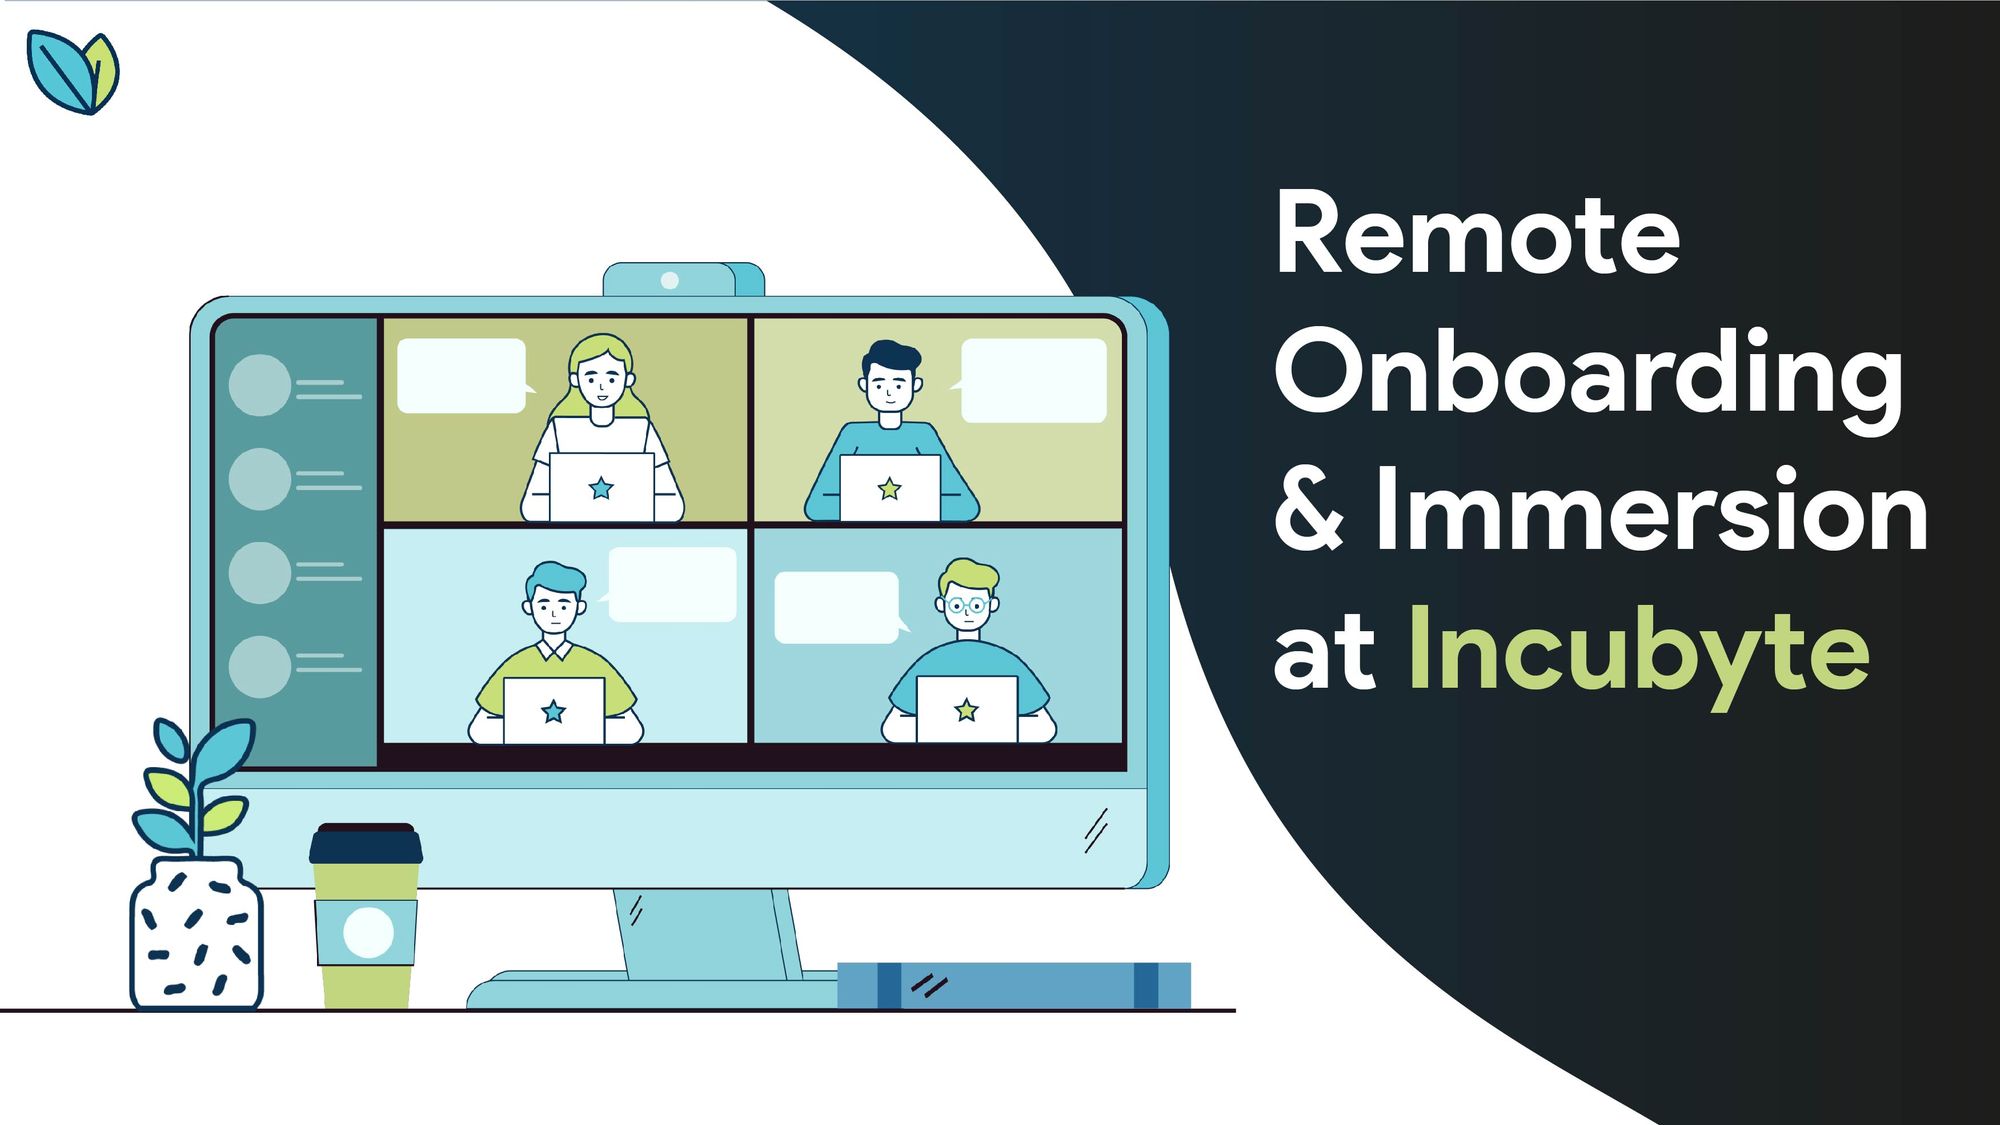 Remote Onboarding & Immersion at Incubyte